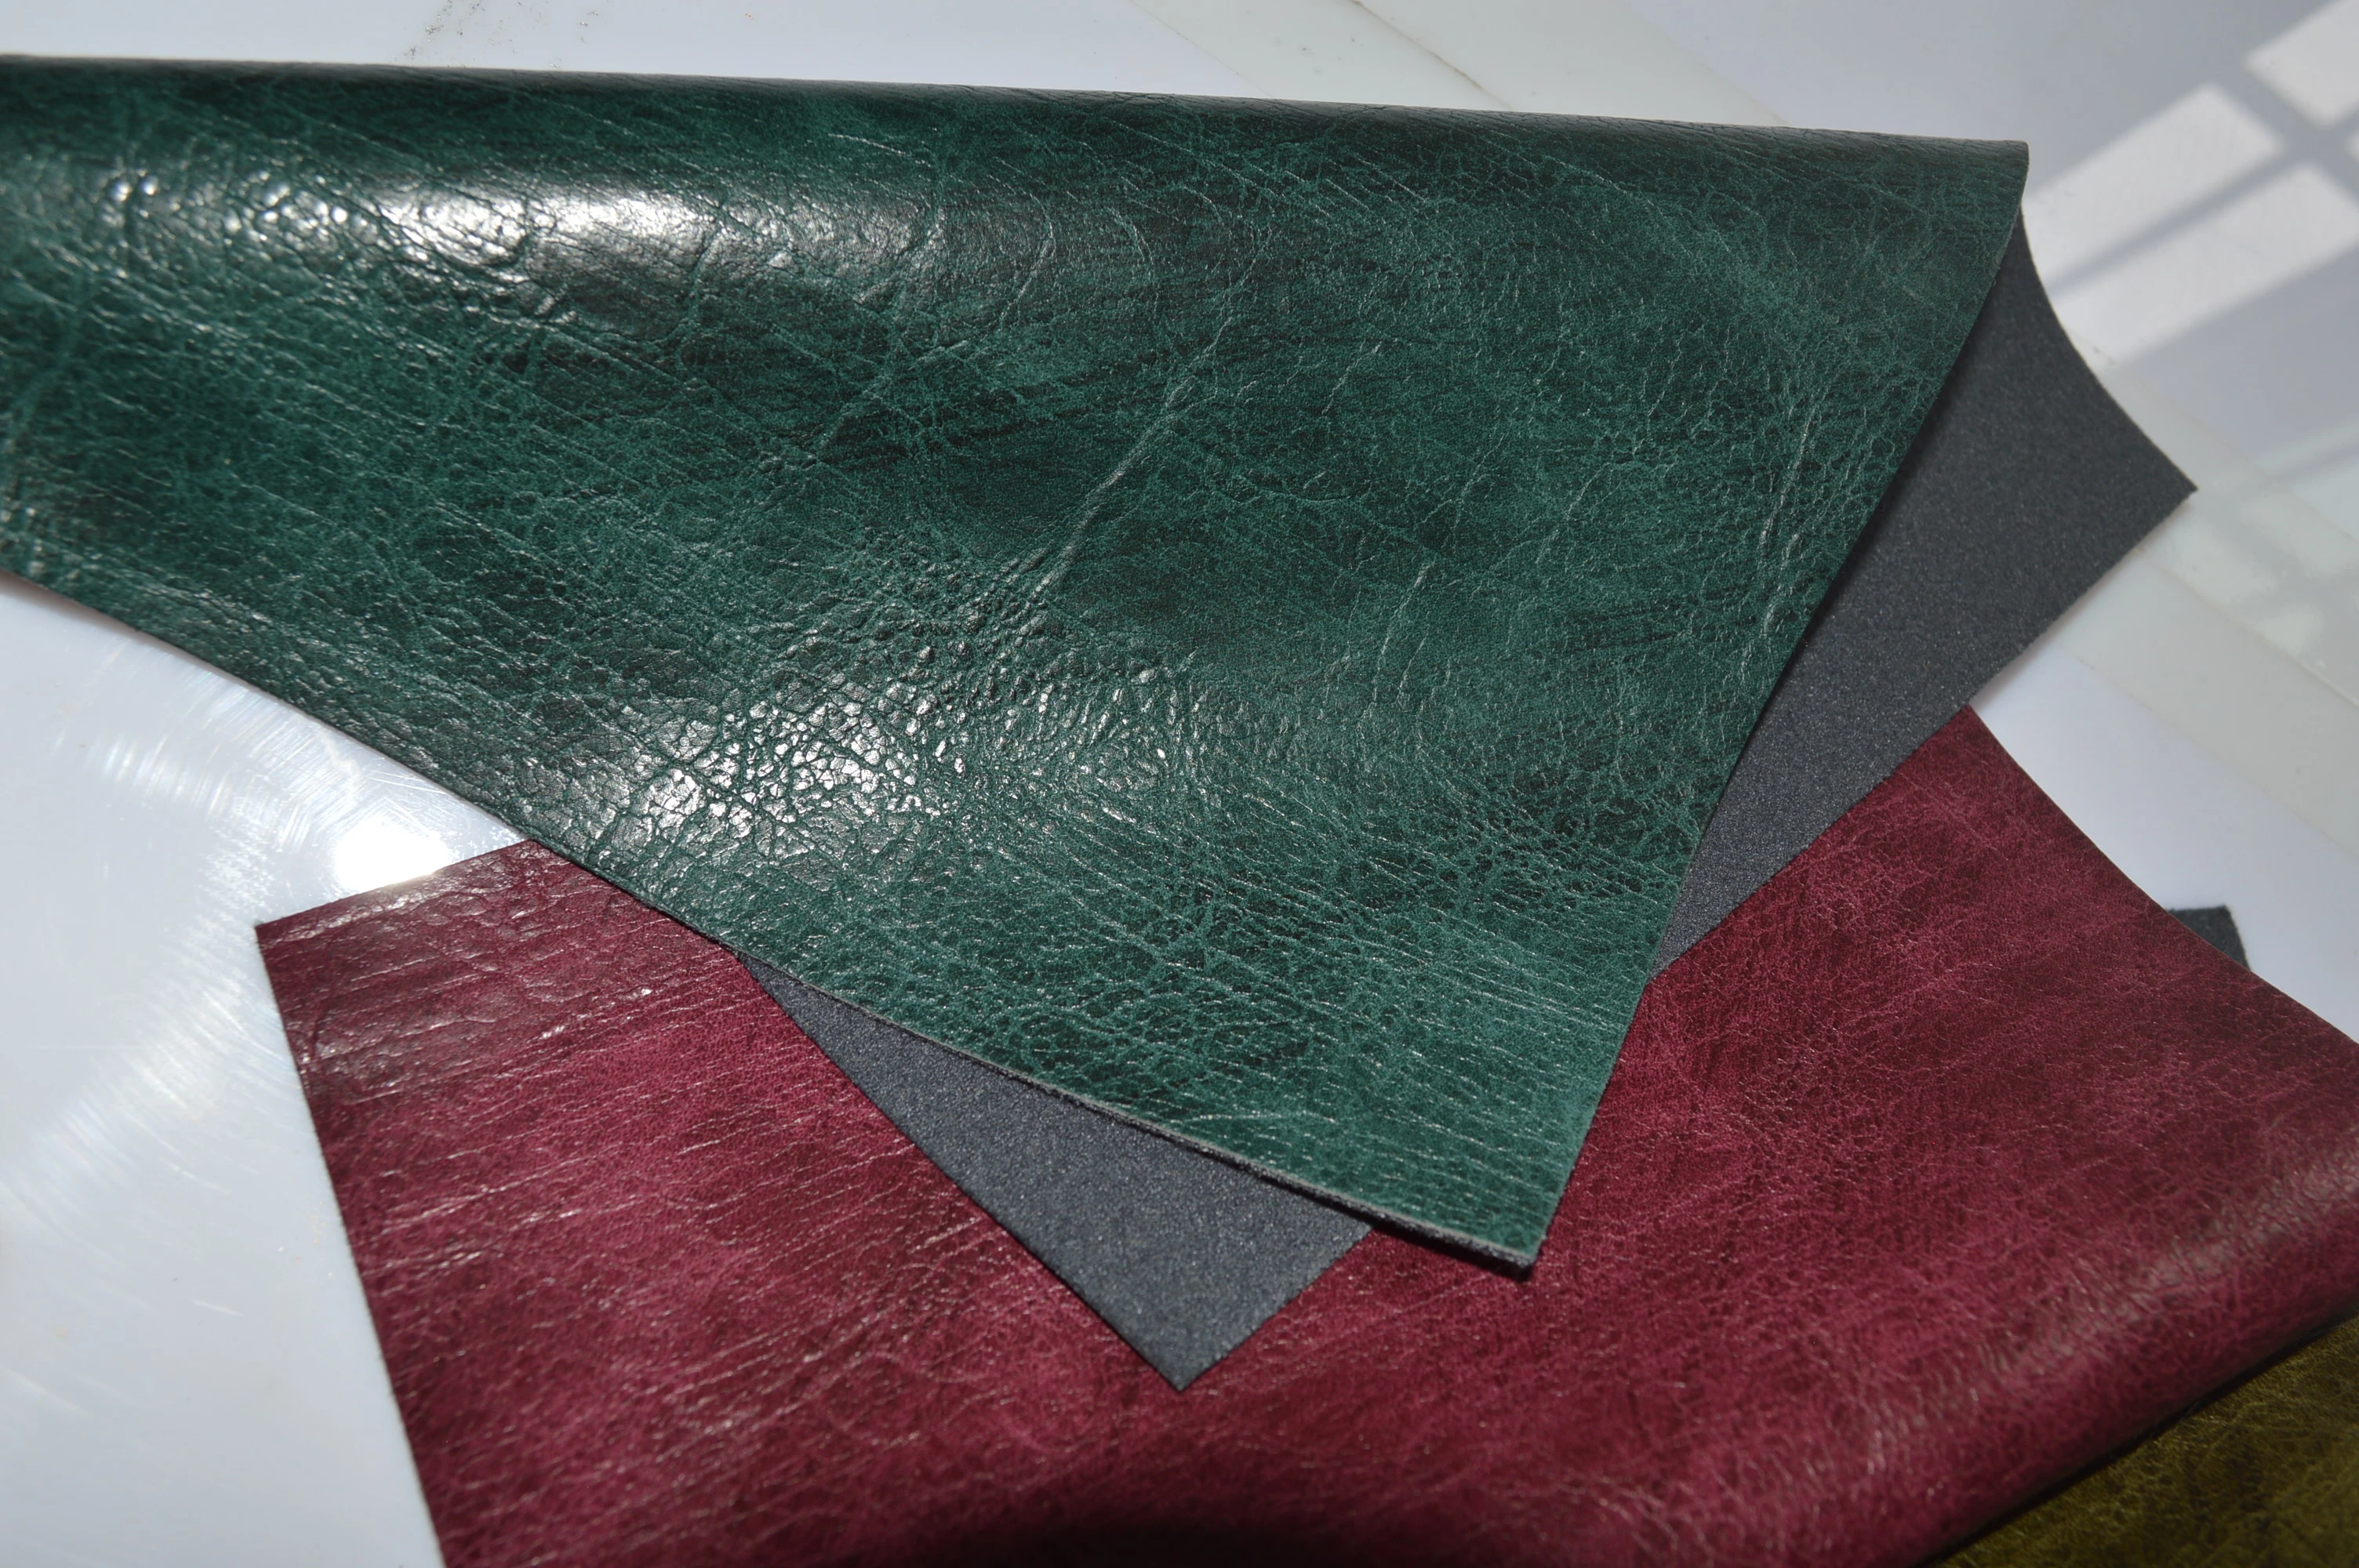 2020 hot sell recycle artificial leather fabric for shoes and bag from China